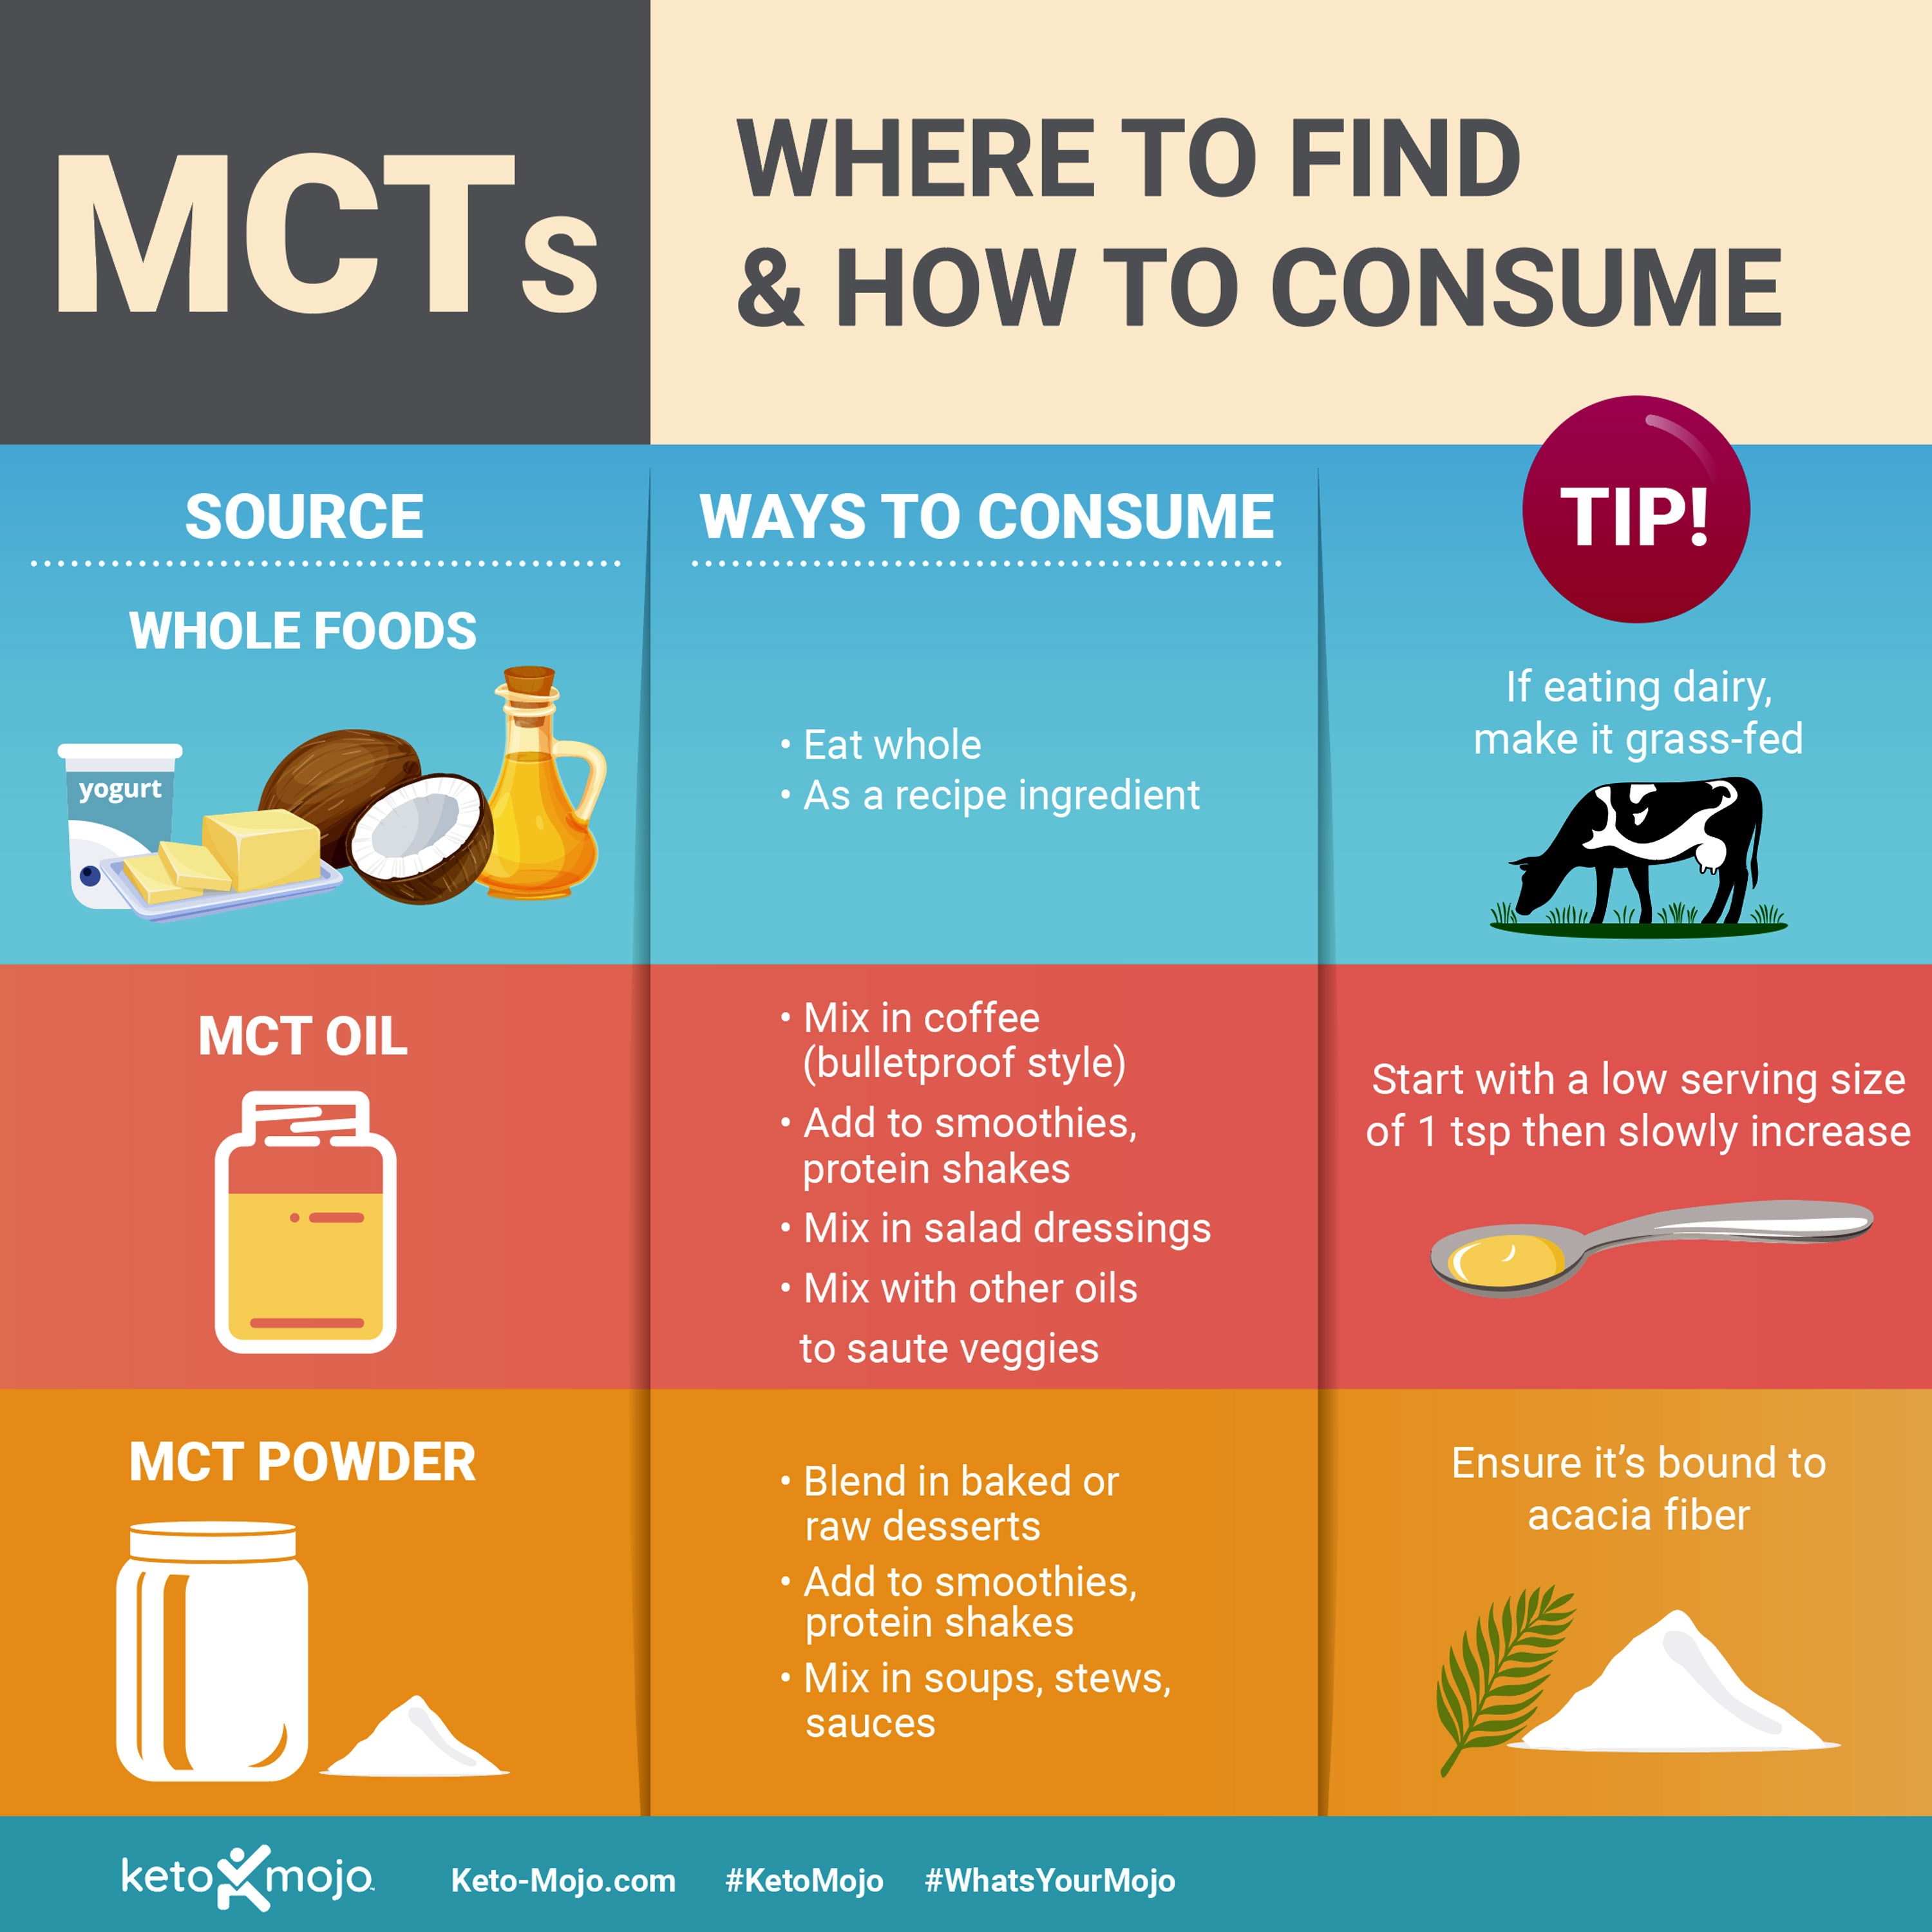 Keto-Mojo: Where to find and how to consume MCT's